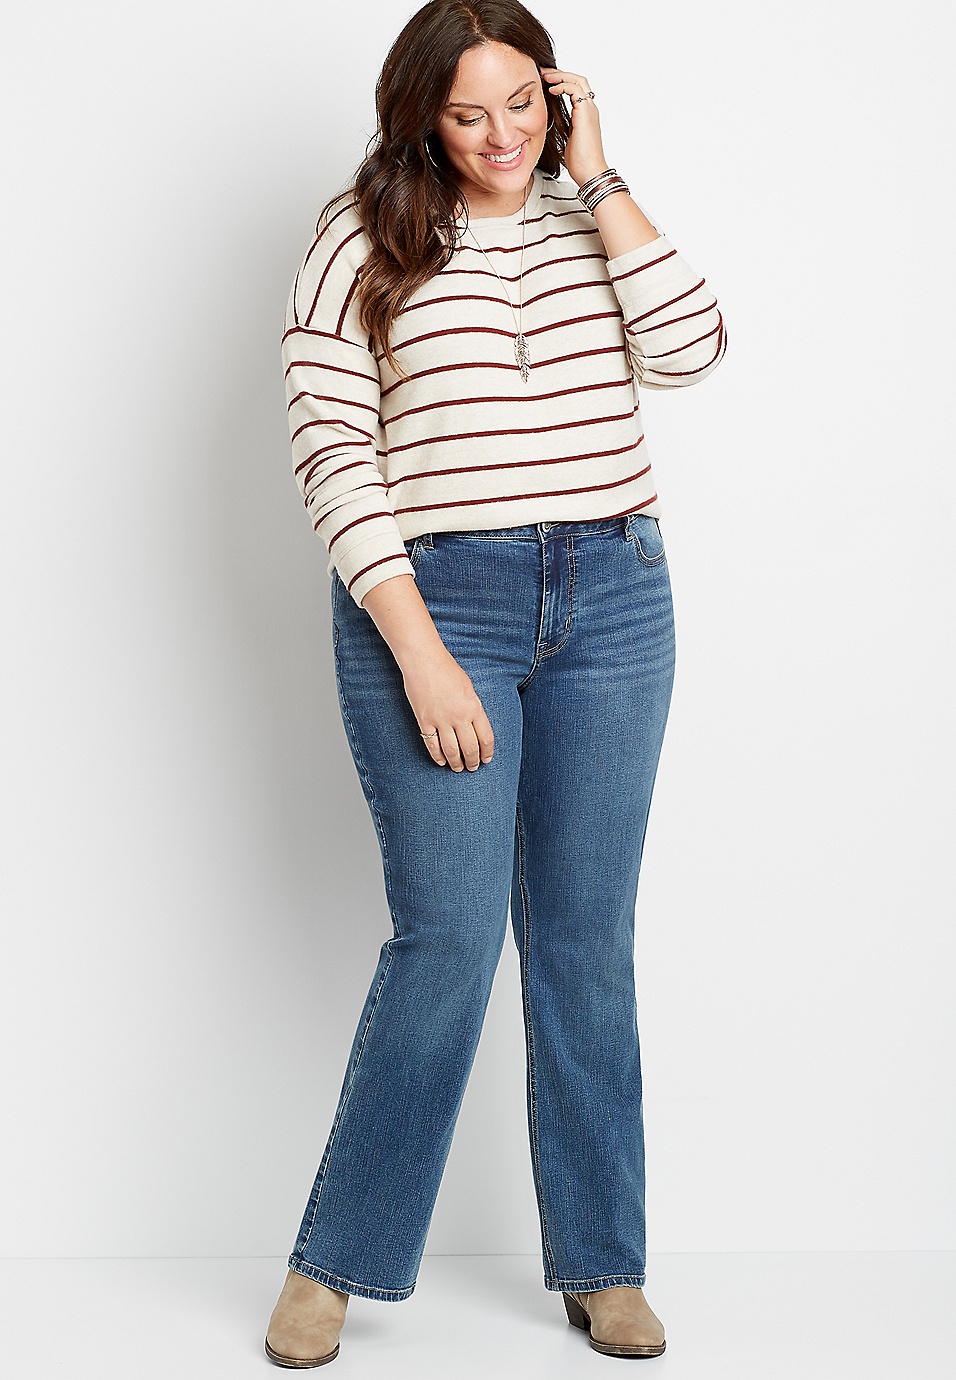 Plus Size m jeans by maurices™ Classic Slim Boot Curvy High Rise Jean |  maurices